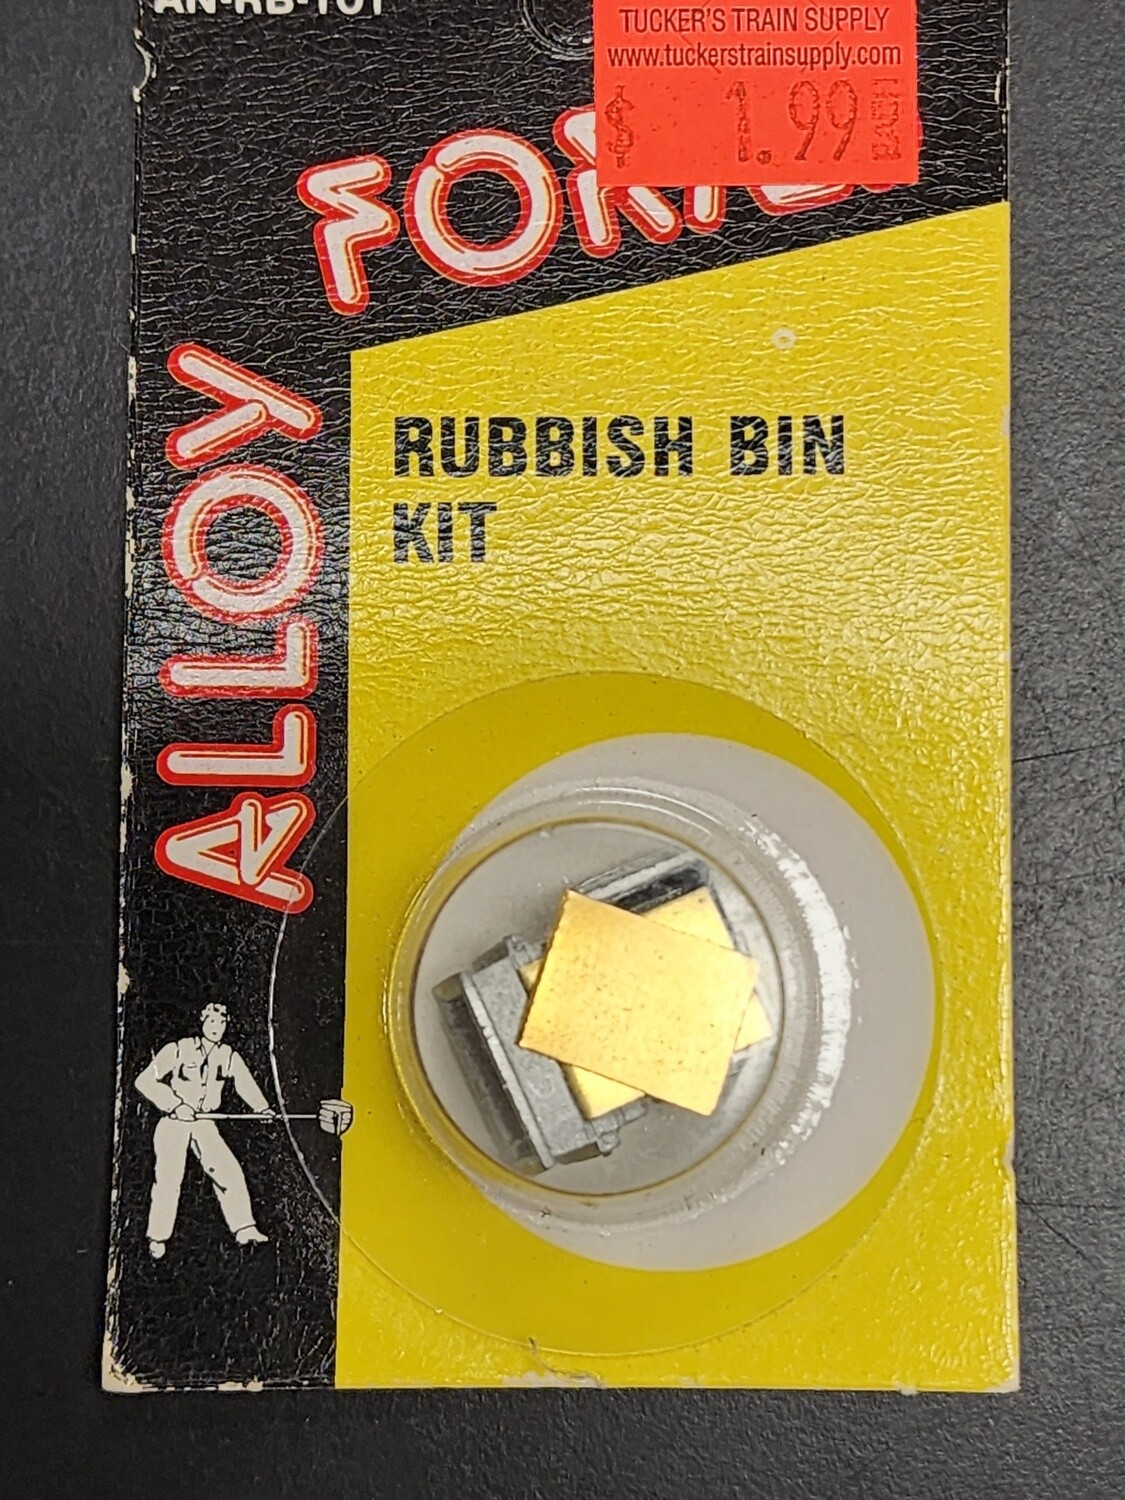 Alloy Forms AN-RB-101 Rubbish Bin Kit